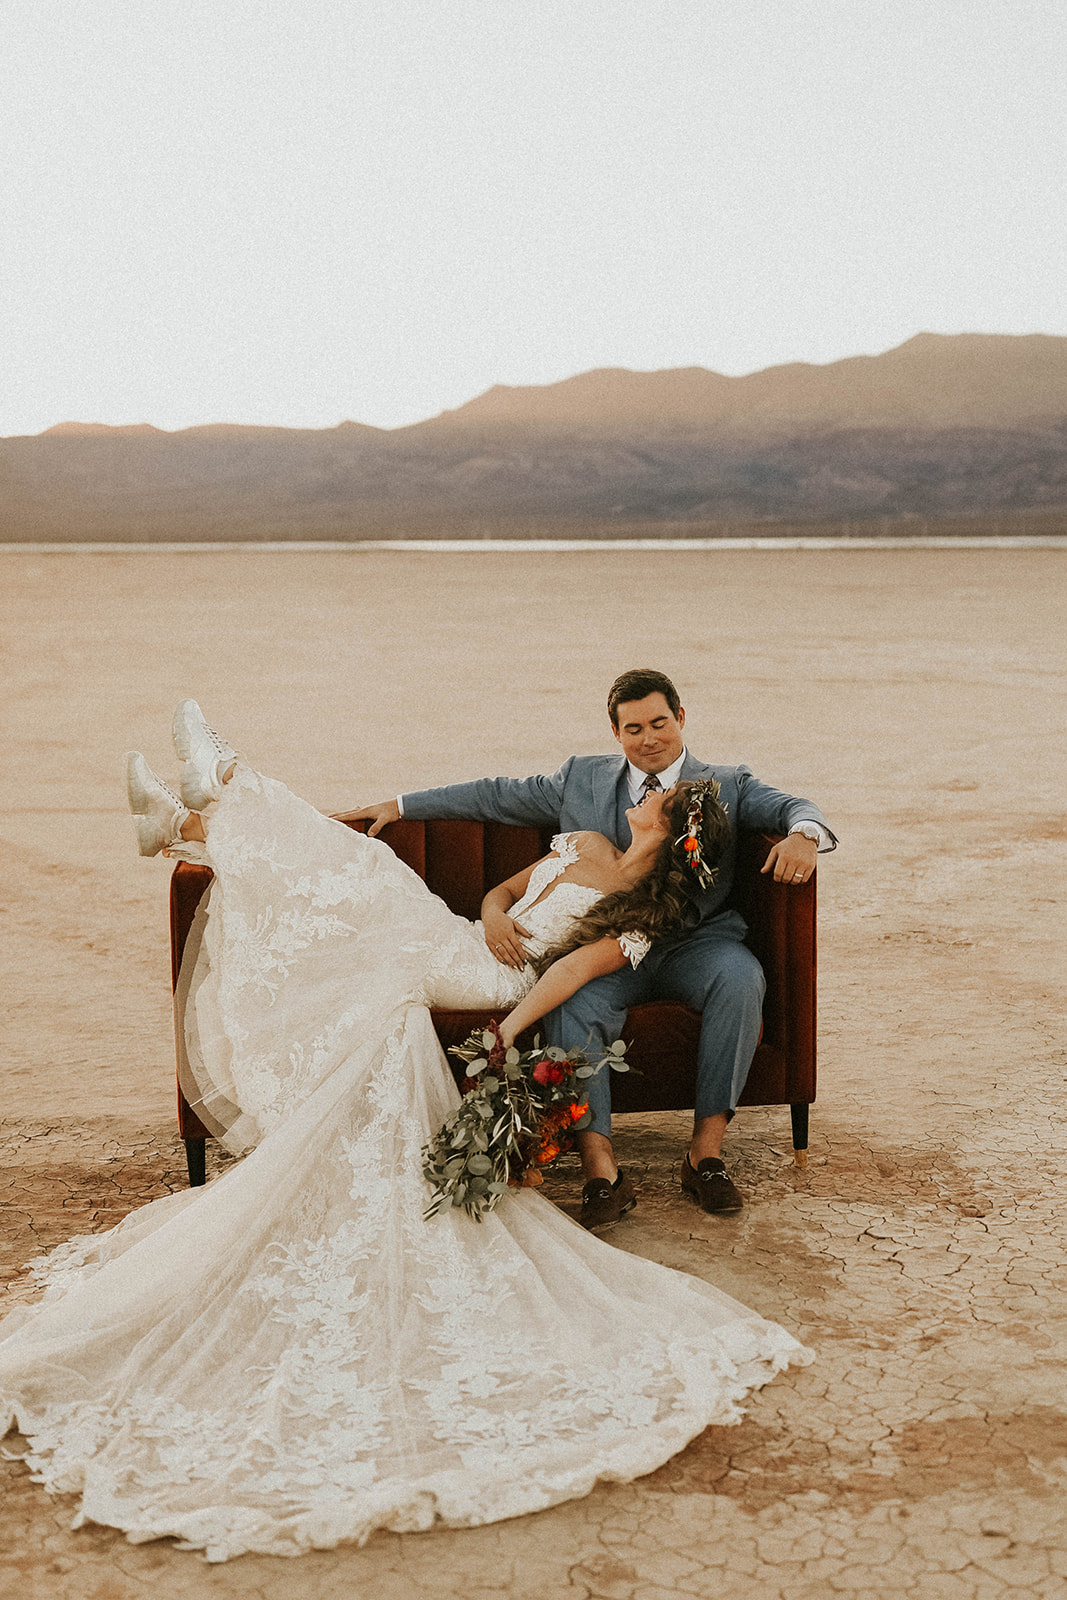 Newlyweds Looking at each other on Velvet Couch during Sunset in Dry Lake Bed Fall Inspired Elopement in Las Vegas